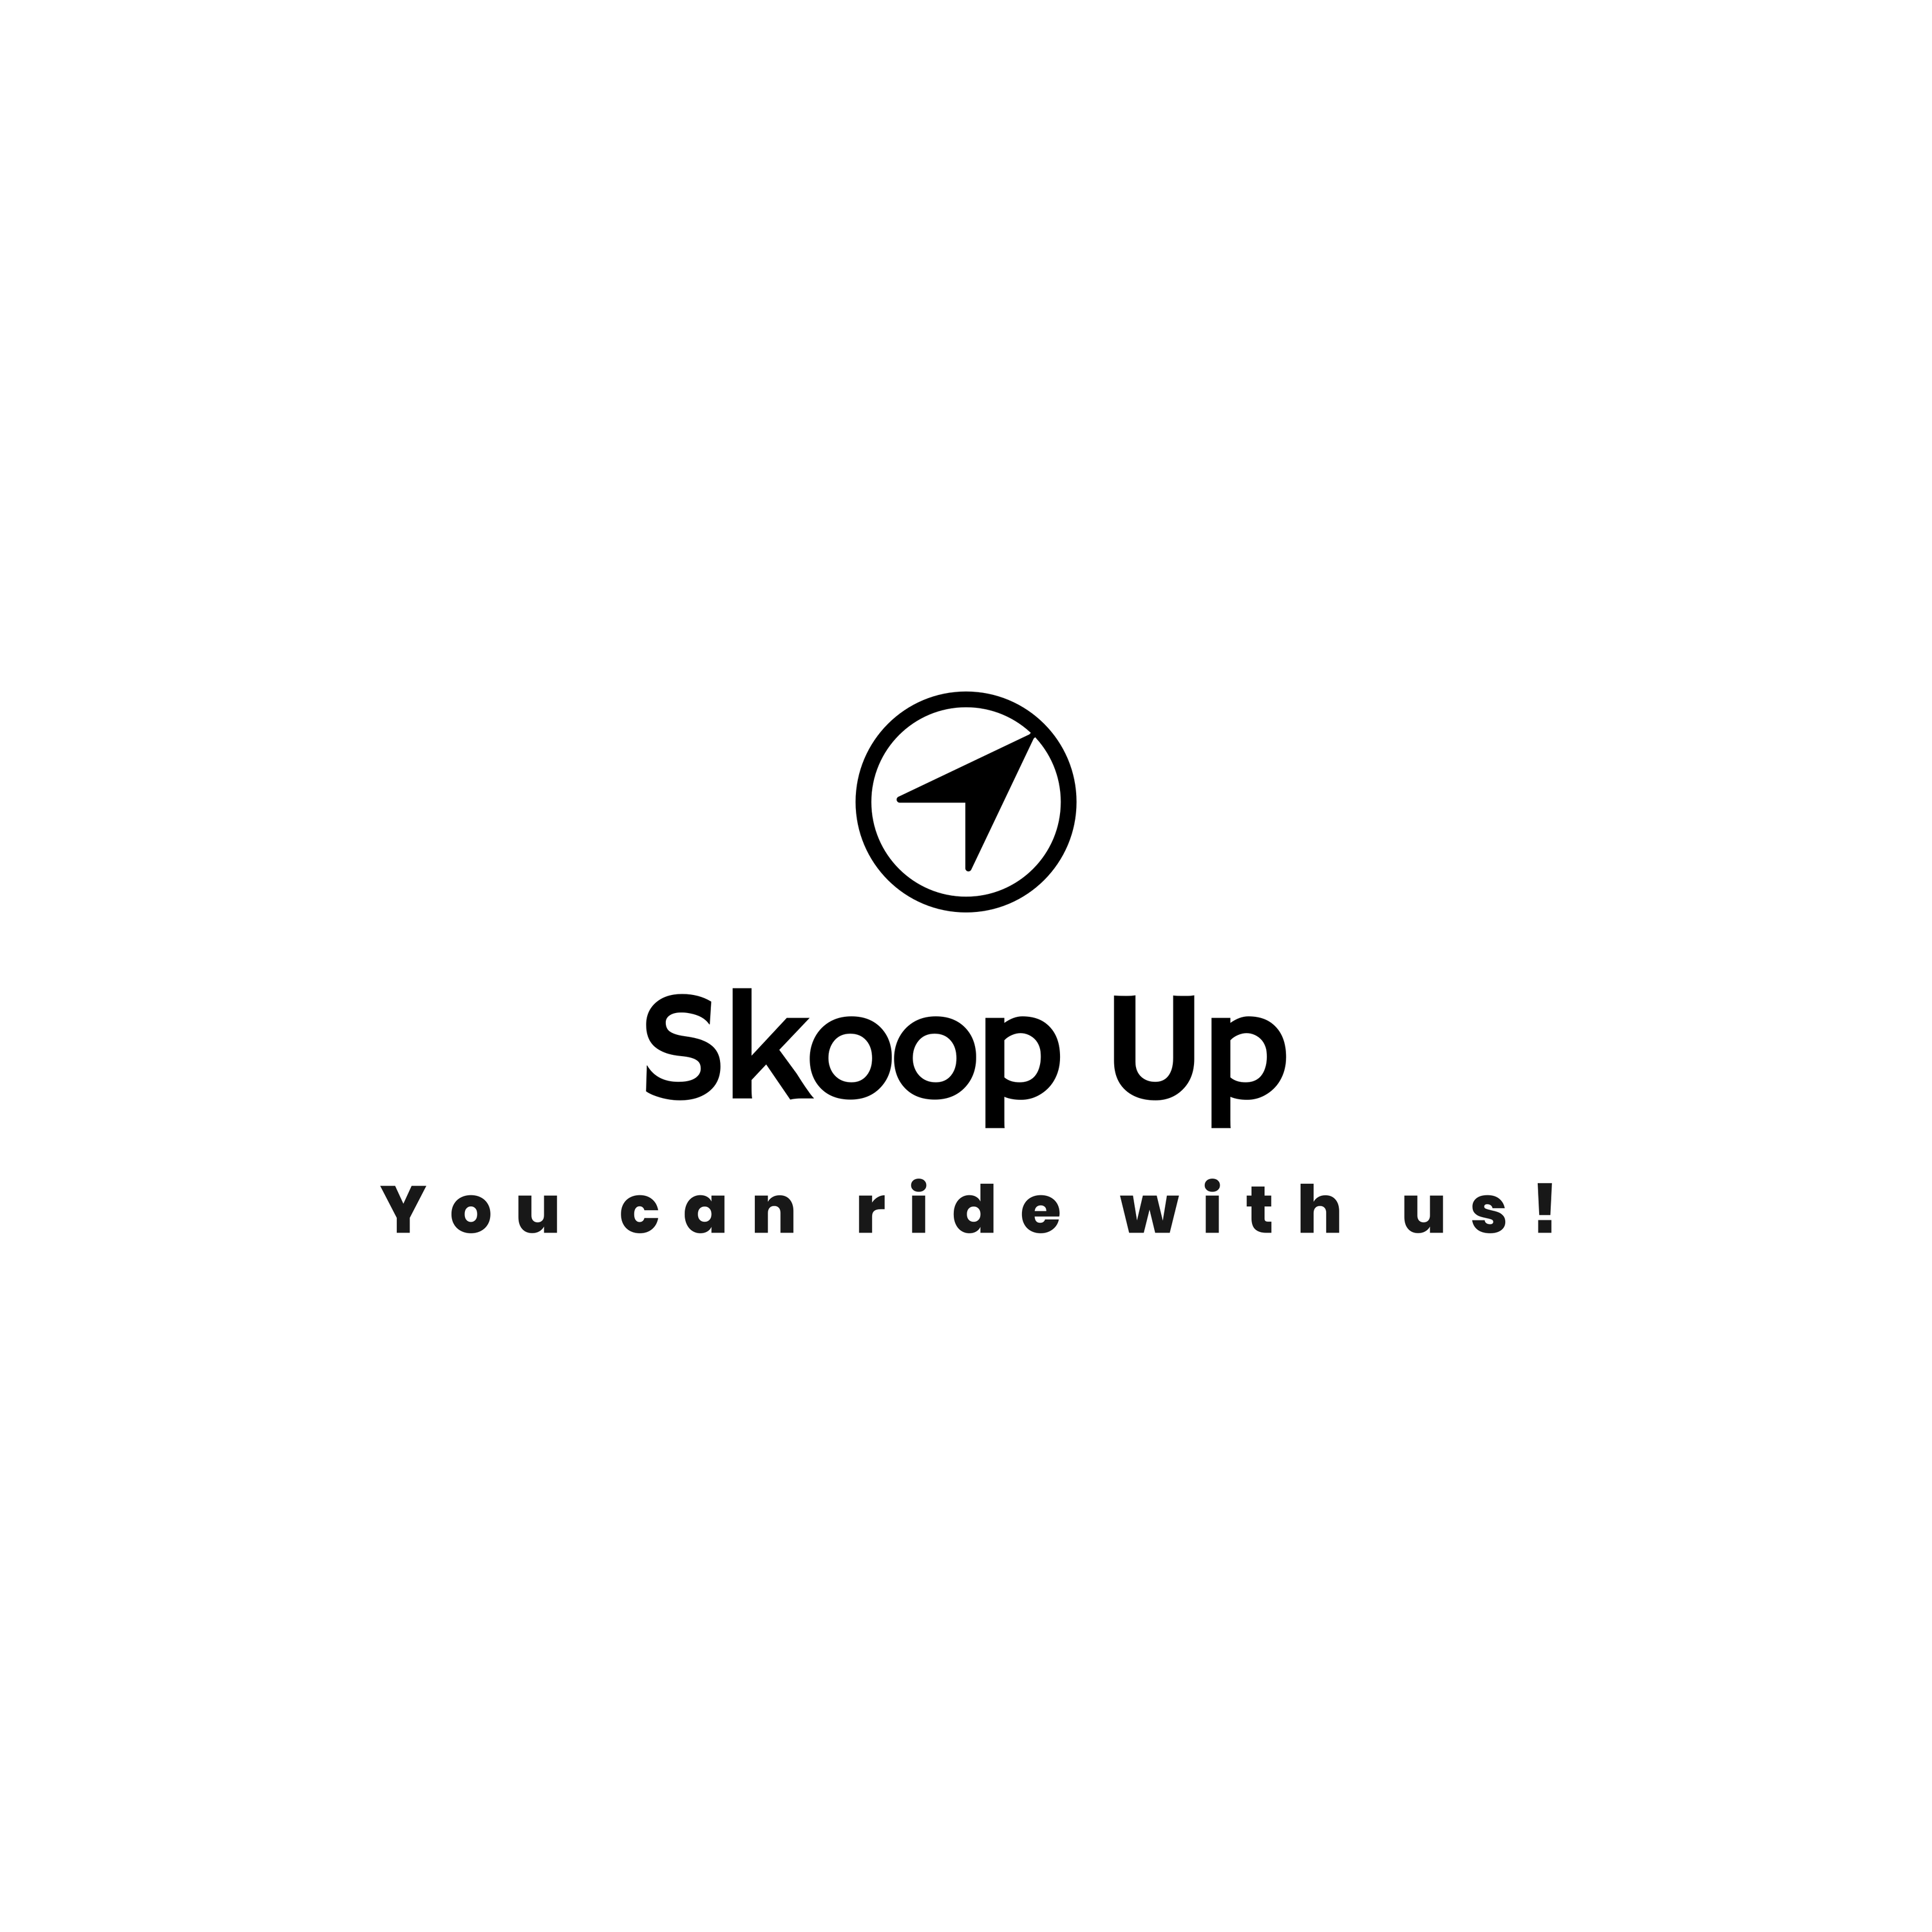 Call Skoop Up for your Valentine’s Day night-out! Book a luxury car by the hour and relax!